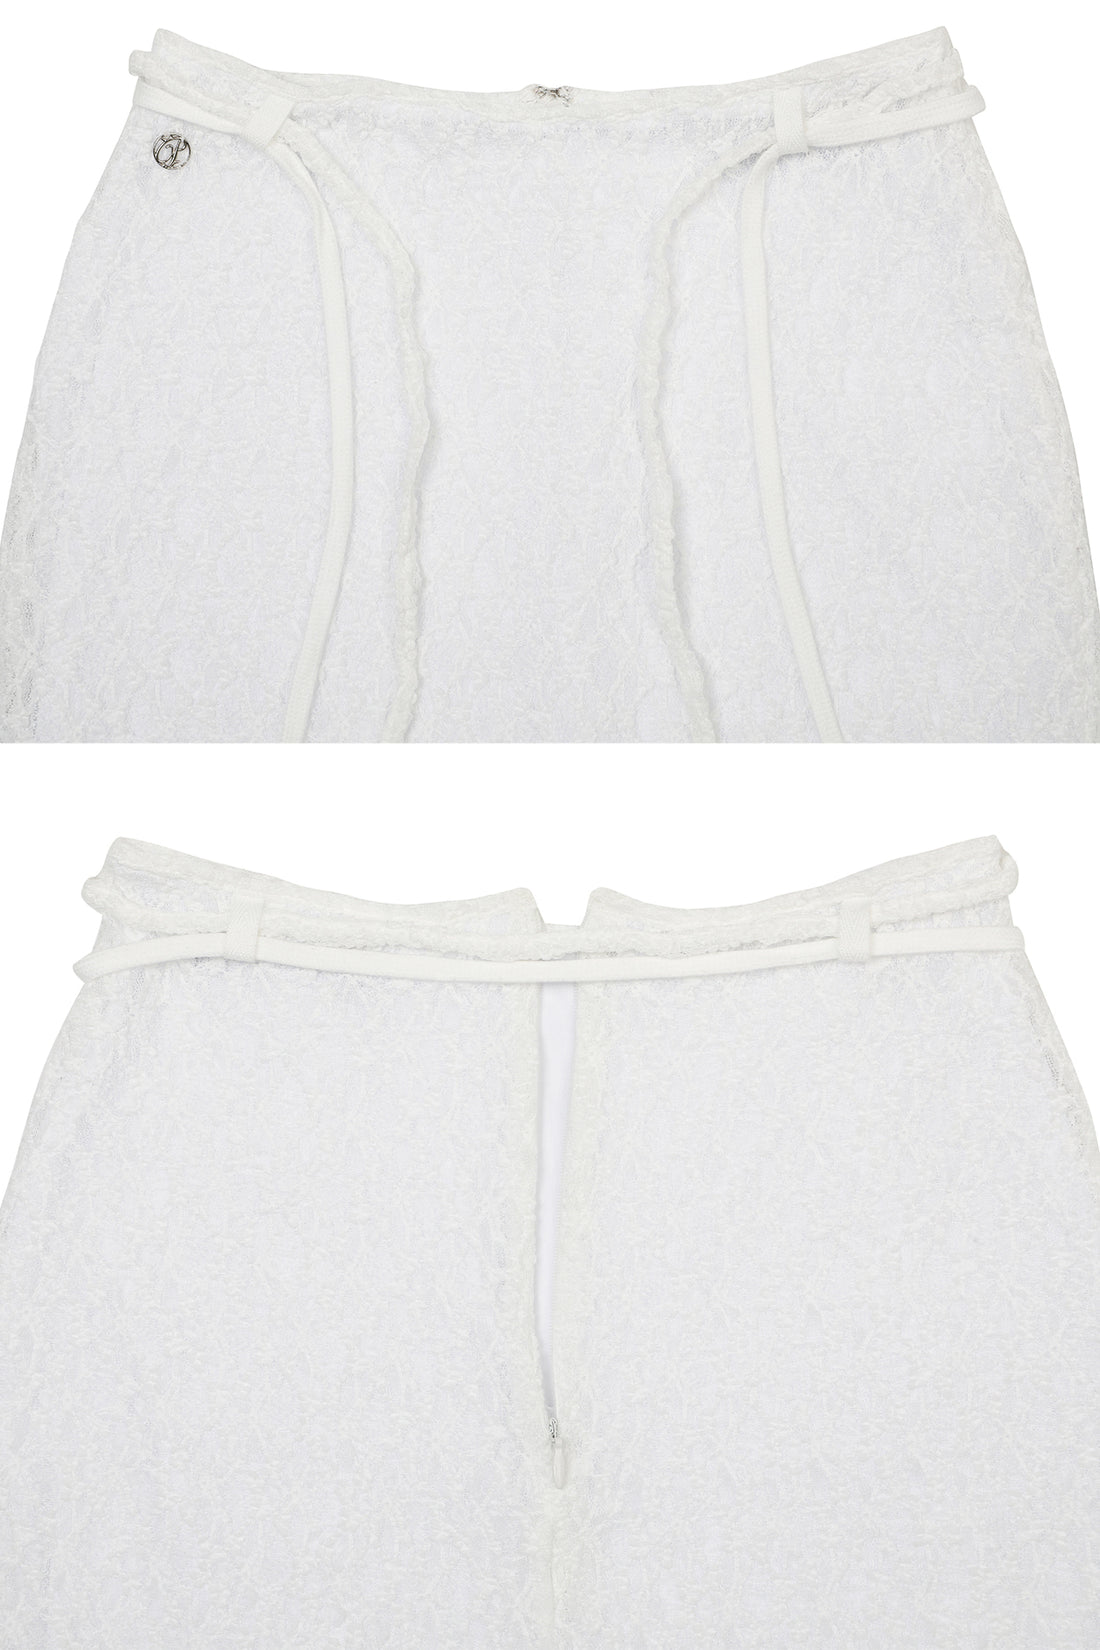 PAIN OR PLEASURE CLAIRE SKIRT WHITE